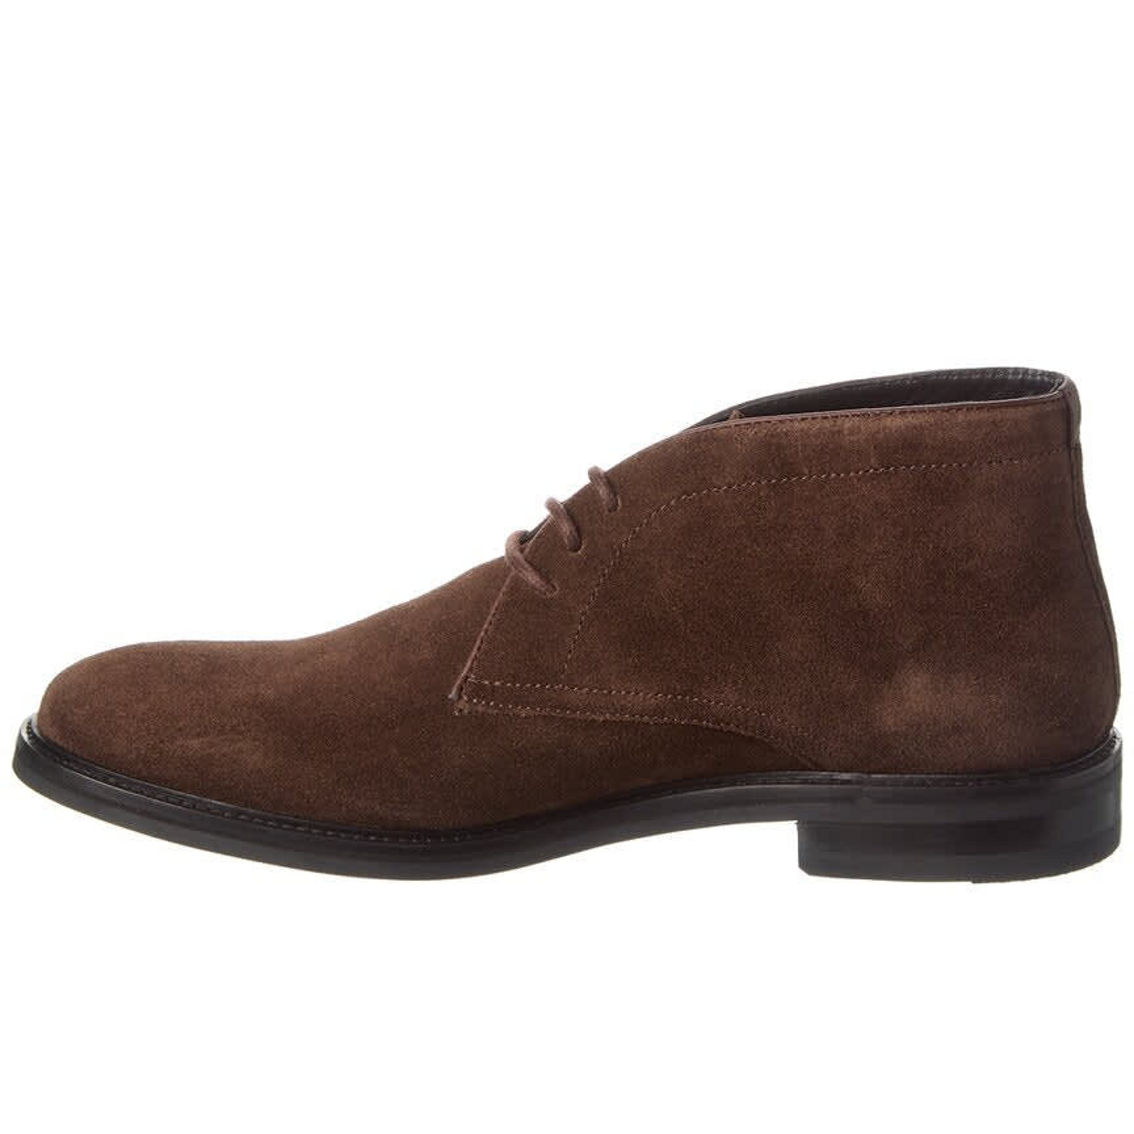 Ted Baker Andrews Suede Chukka Boot - Image 2 of 4